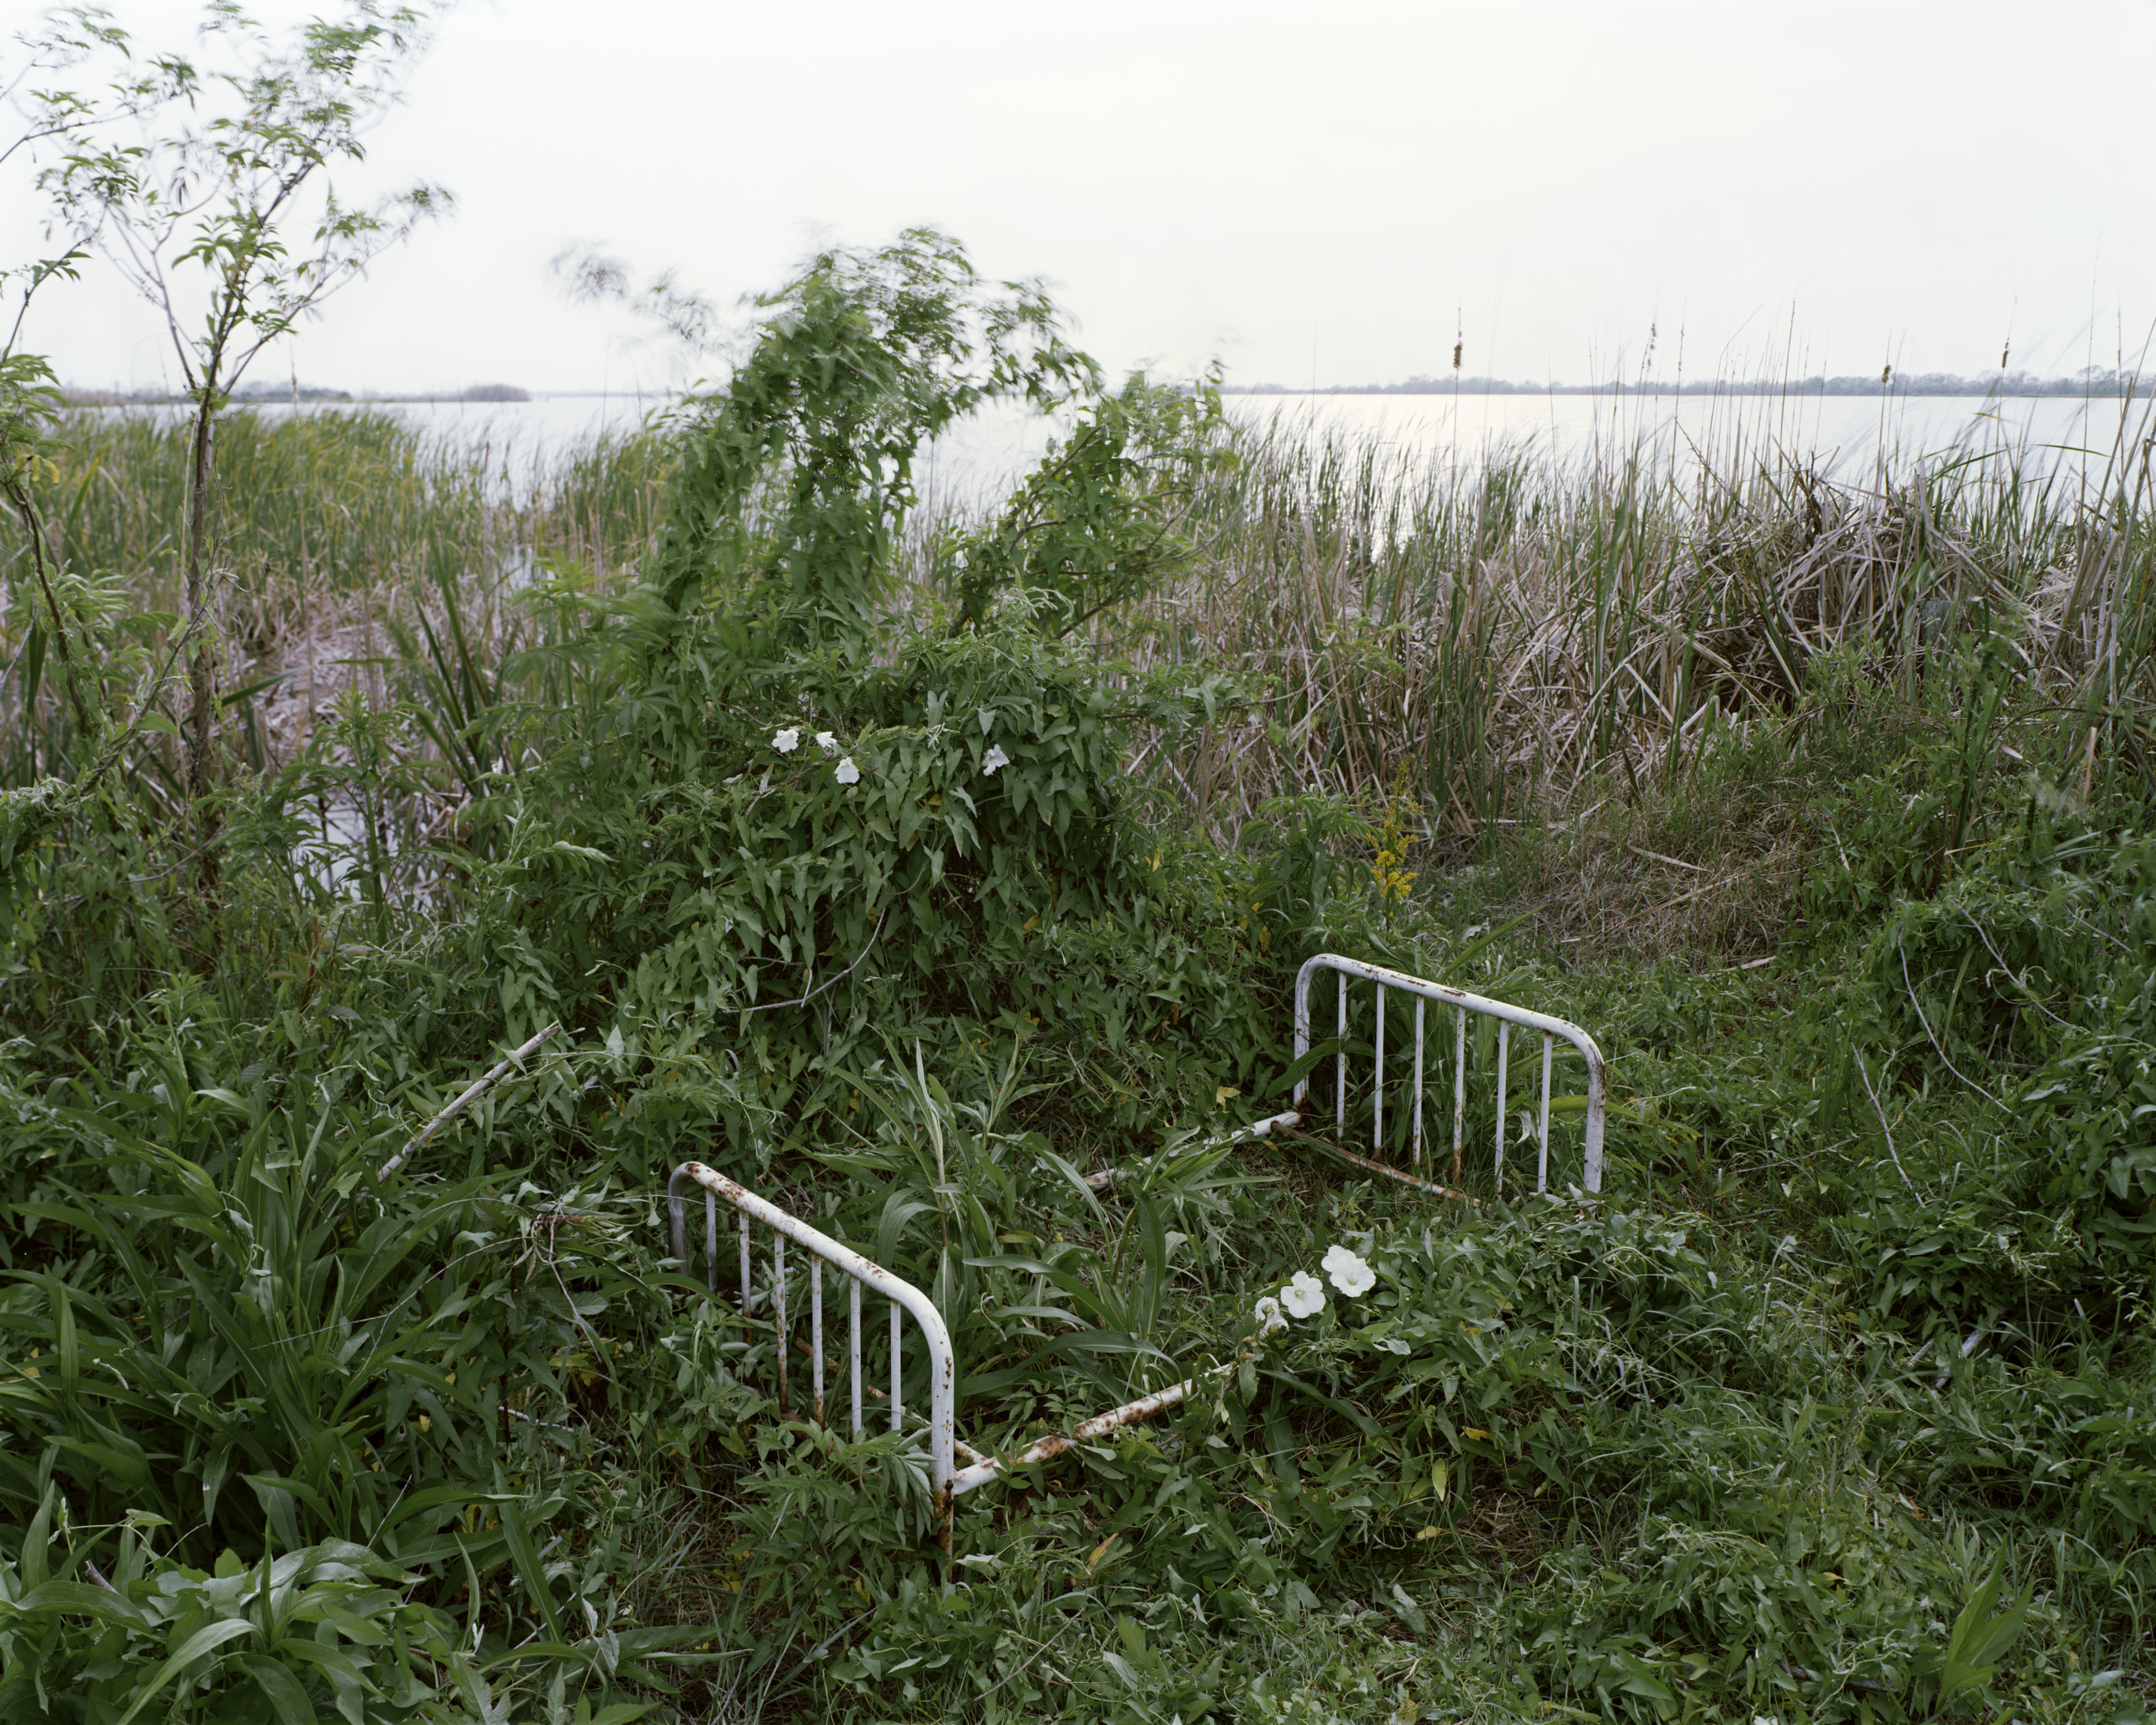 Sleeping By The Mississippi • Alec Soth • Magnum Photos